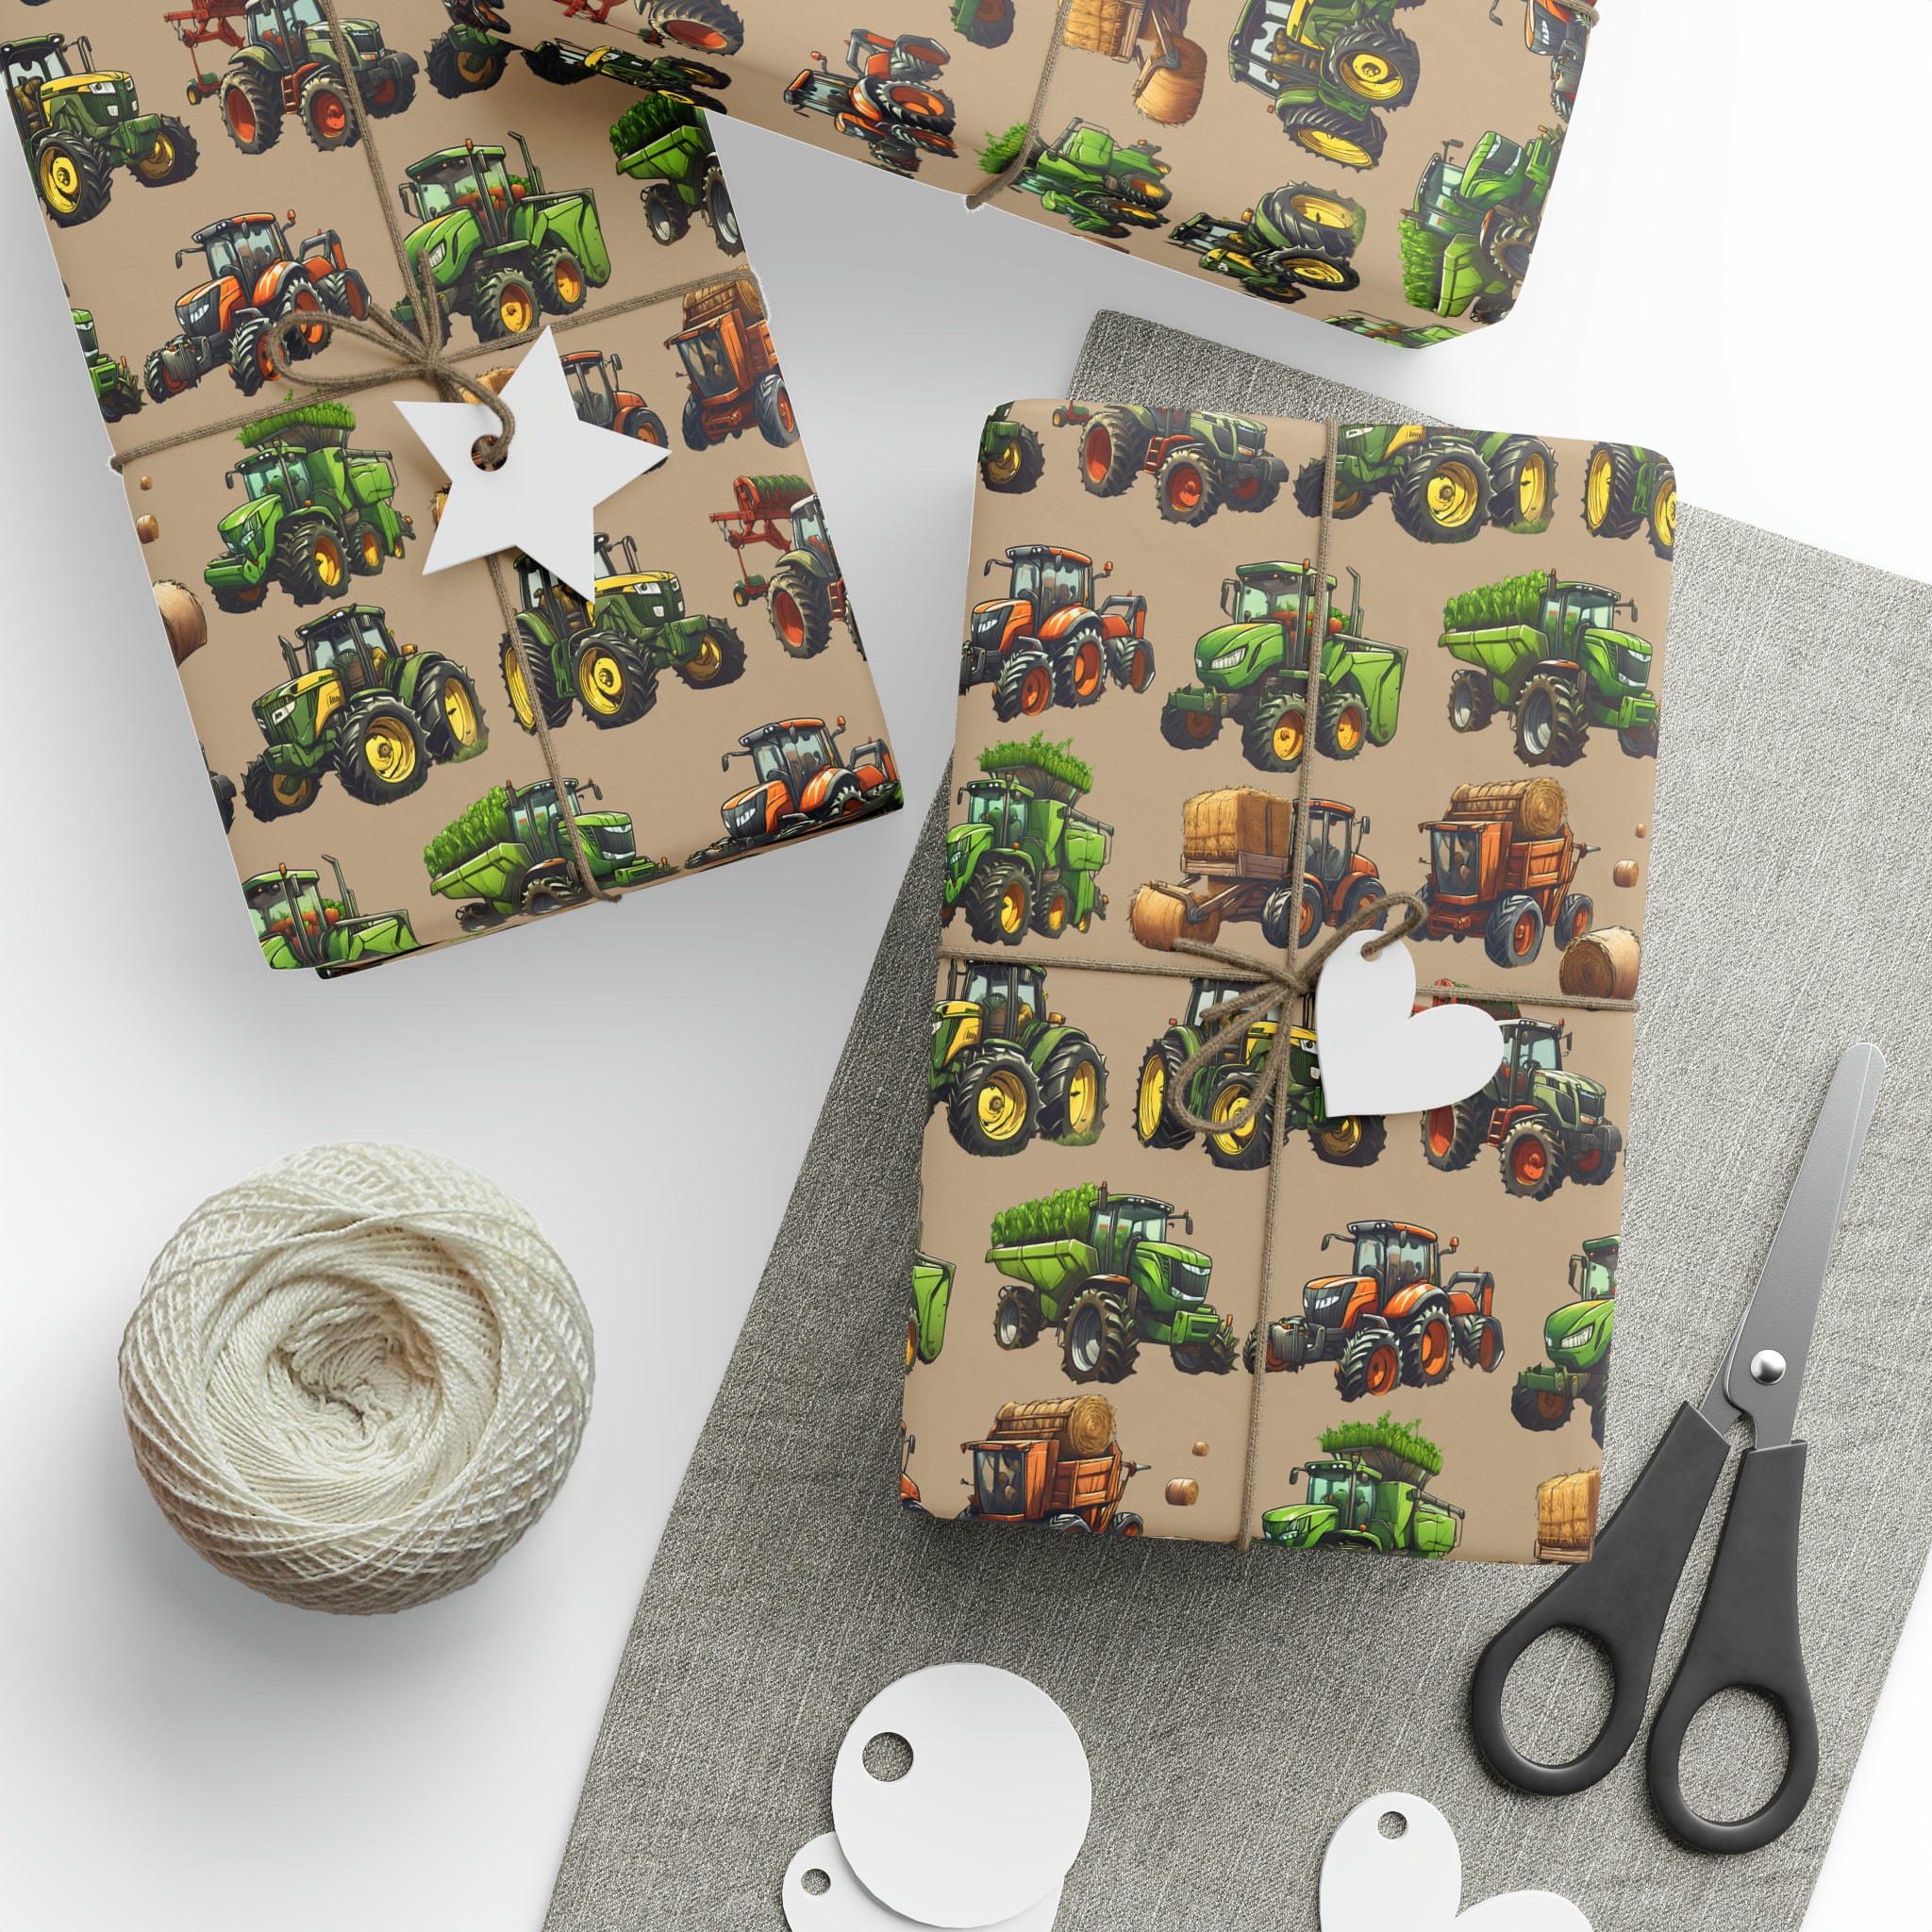 Custom FARM Birthday Gift Wrapping Paper, Personalized Country Theme Happy  Birthday Wrapping Paper Roll, Kids Name Birthday Wrapping Paper 